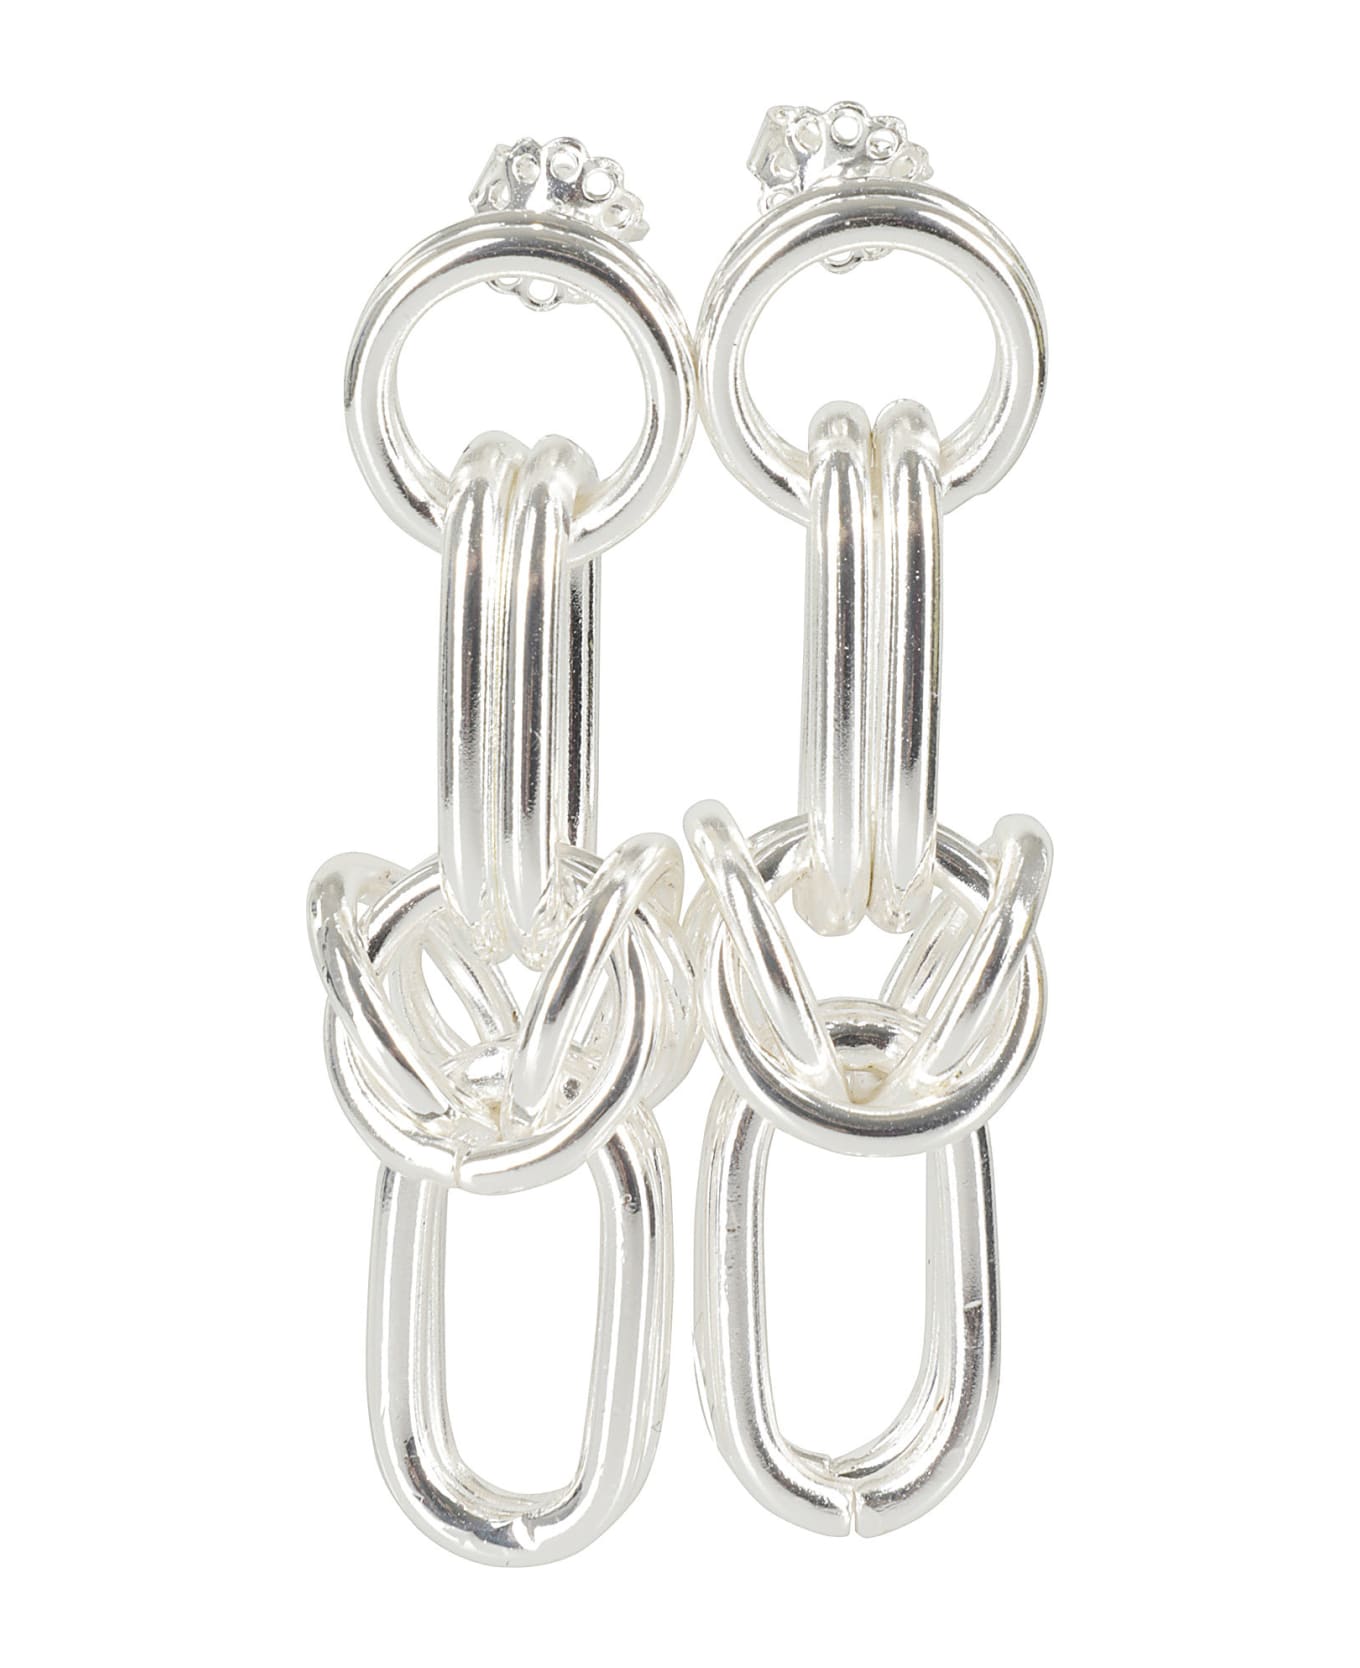 Federica Tosi Earring Cecile - Silver イヤリング